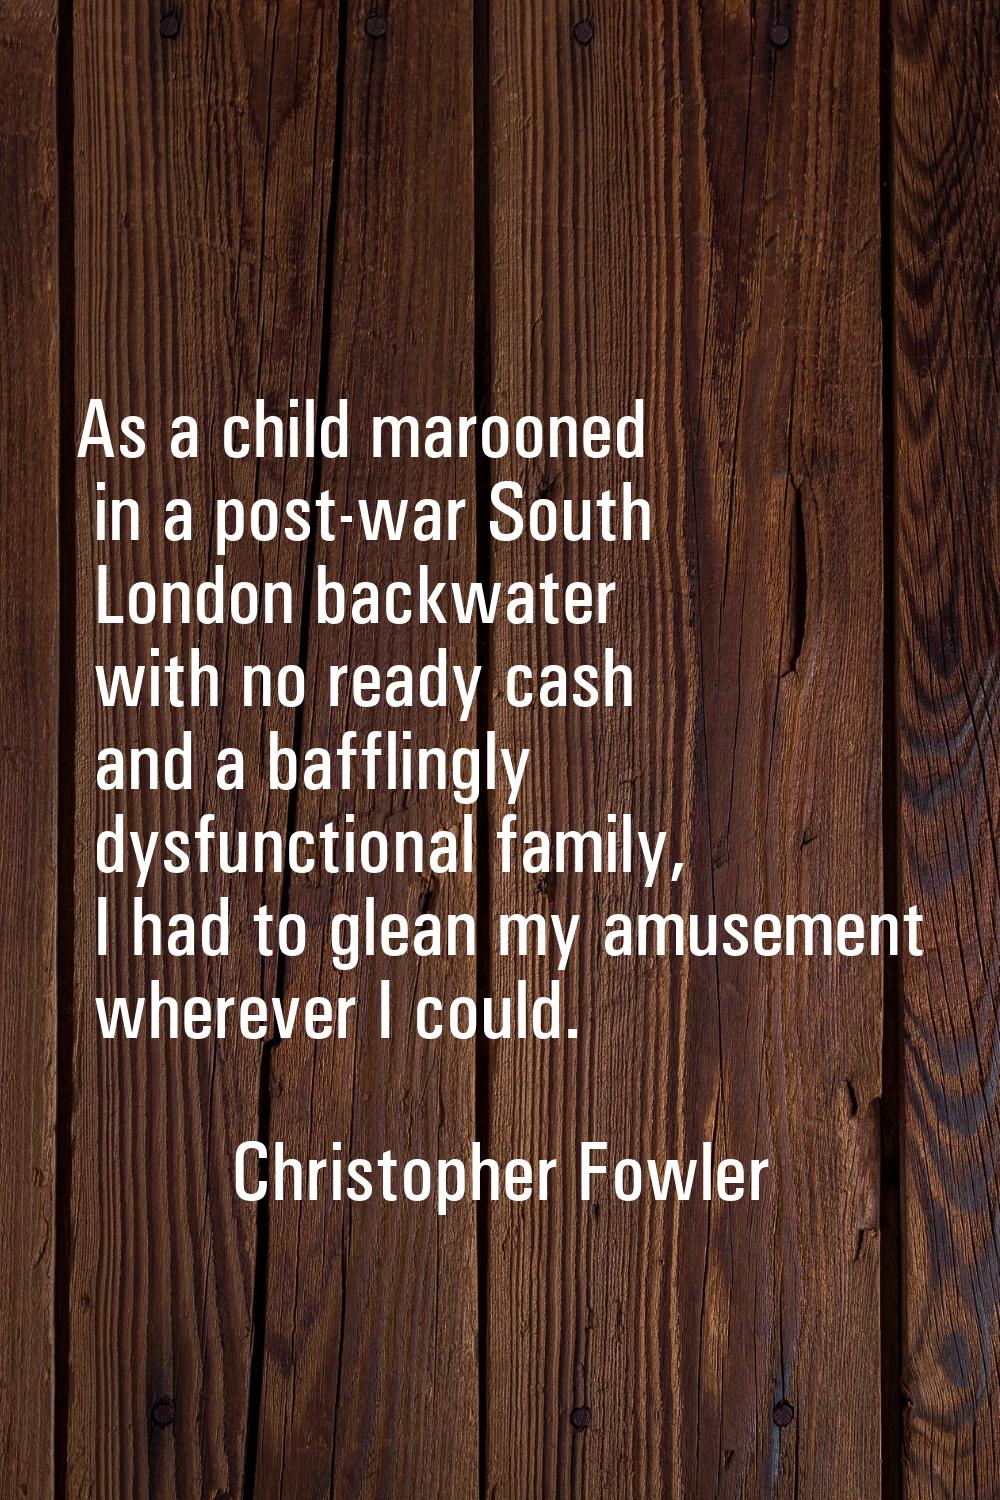 As a child marooned in a post-war South London backwater with no ready cash and a bafflingly dysfun